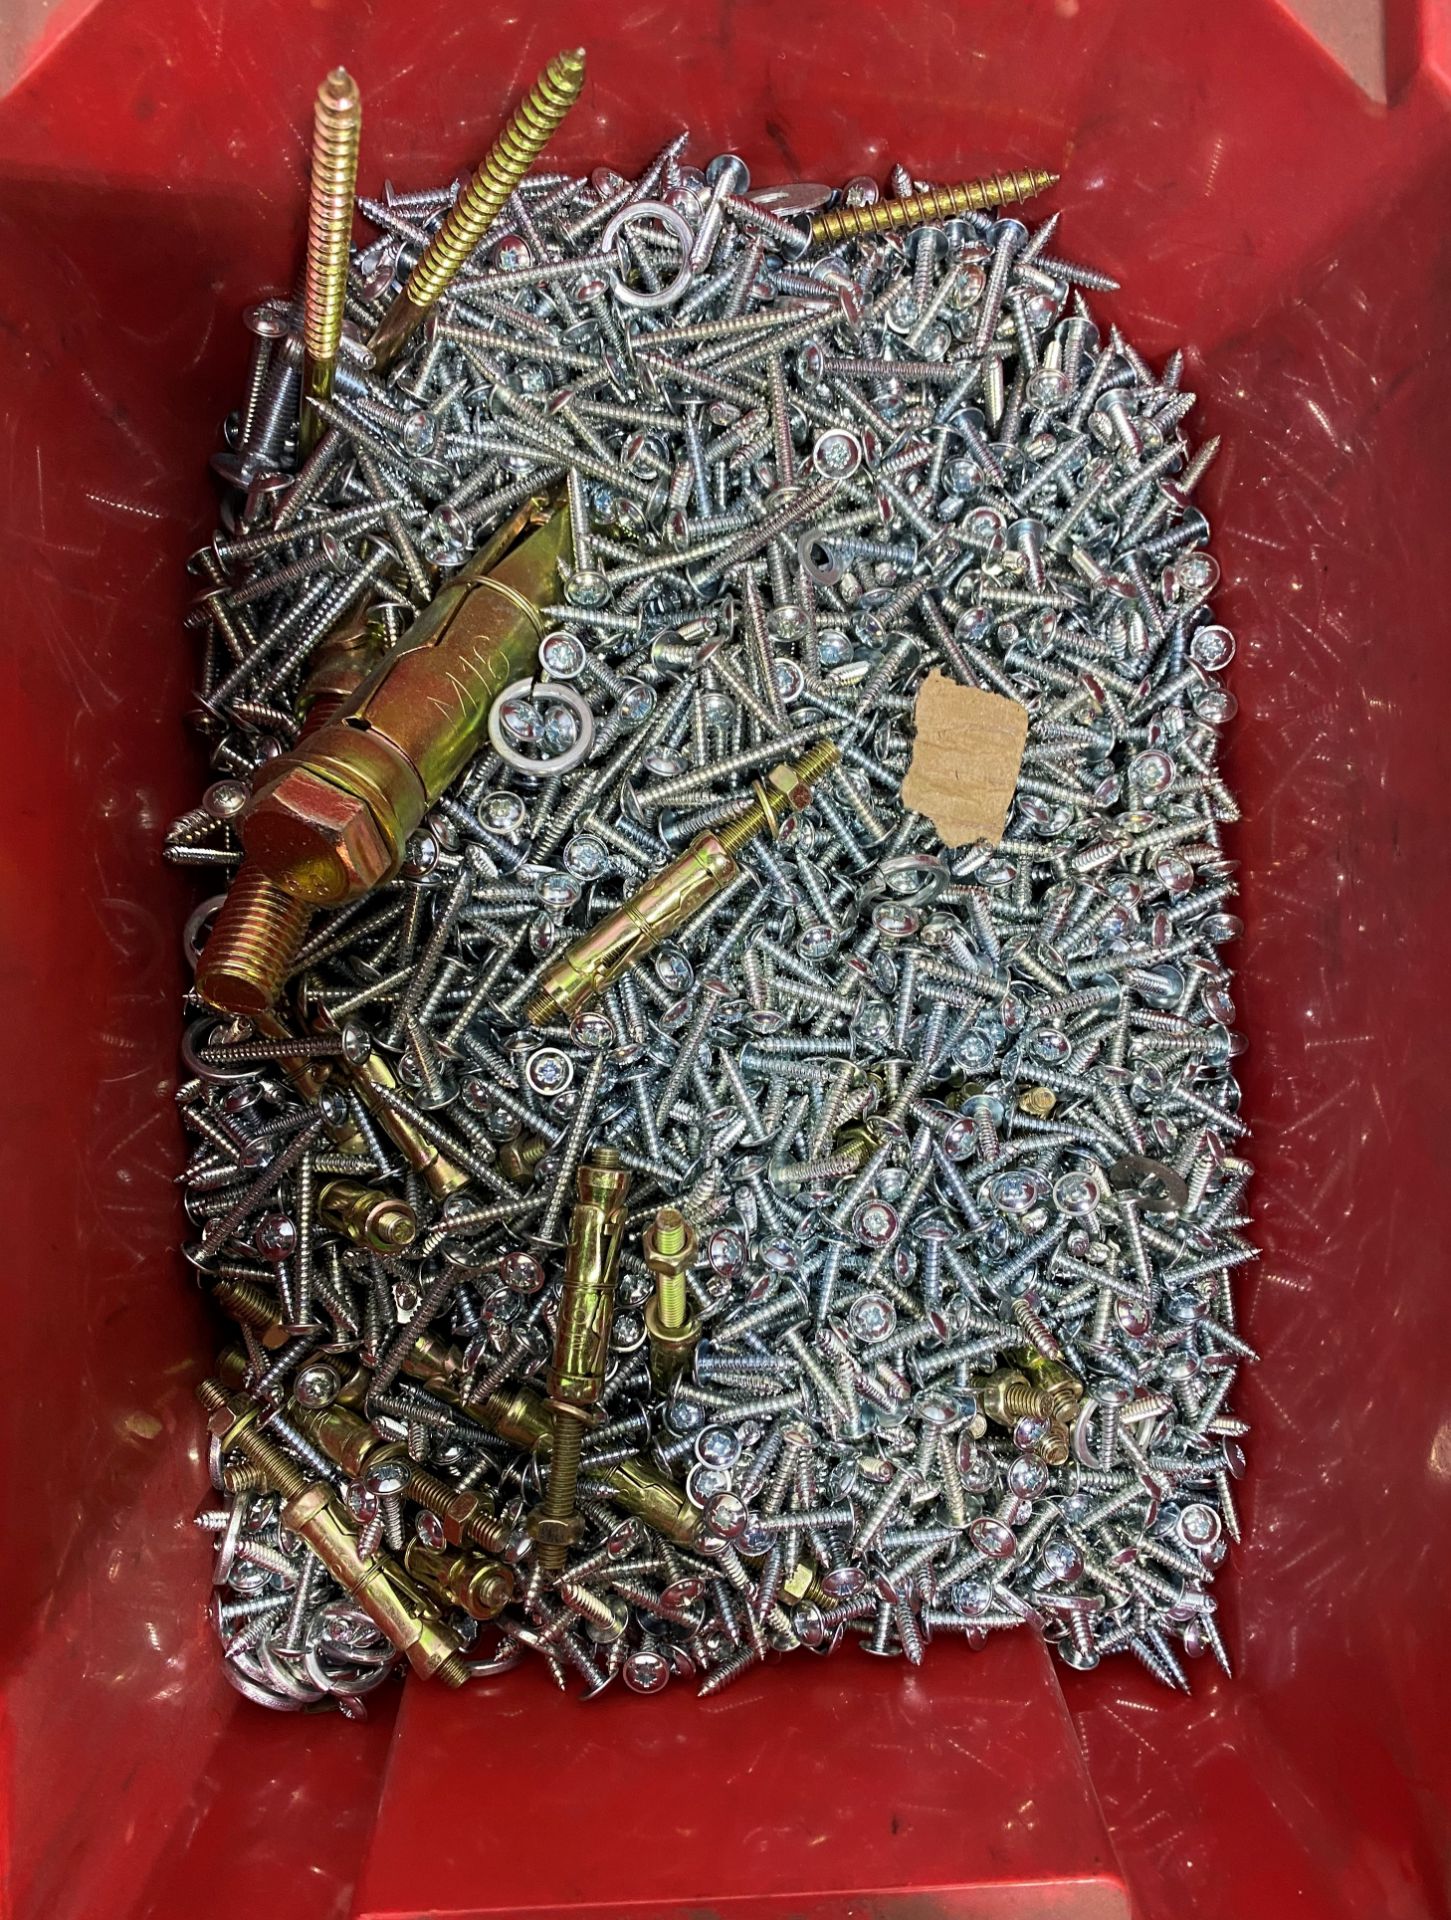 Large Quantity Of Screws,Nuts,Bolts,Fasteners And Various Other Equipment - Image 8 of 20